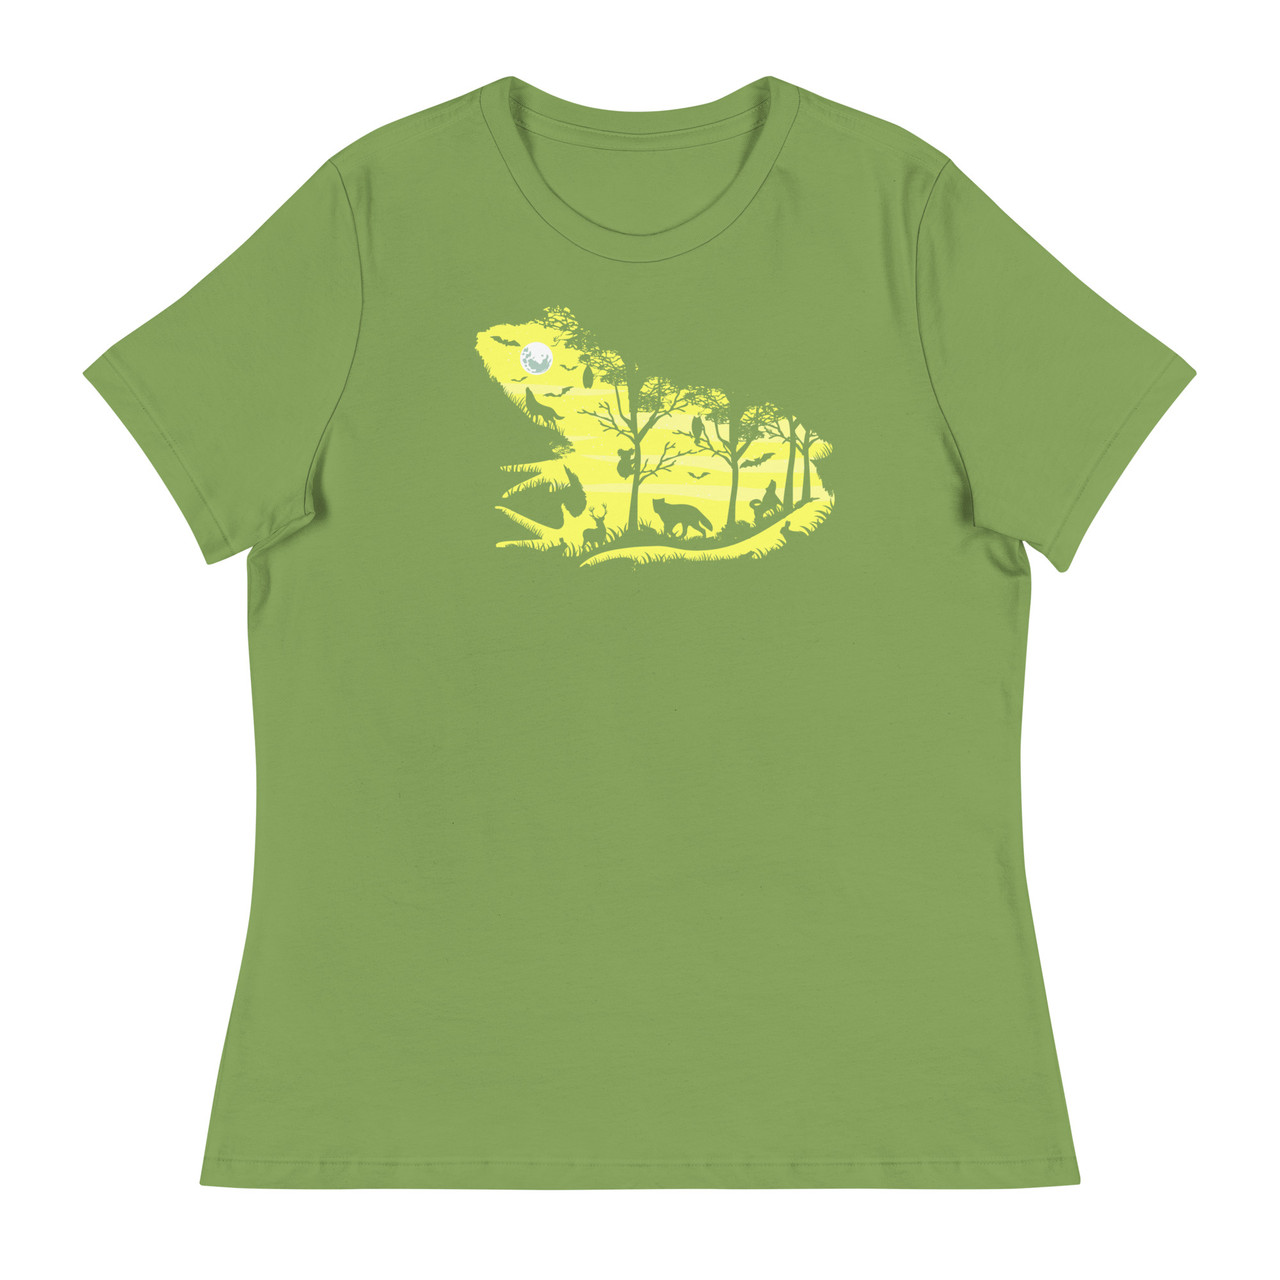 Froggy Silhouette Women's Relaxed T-Shirt - Bella + Canvas 6400 